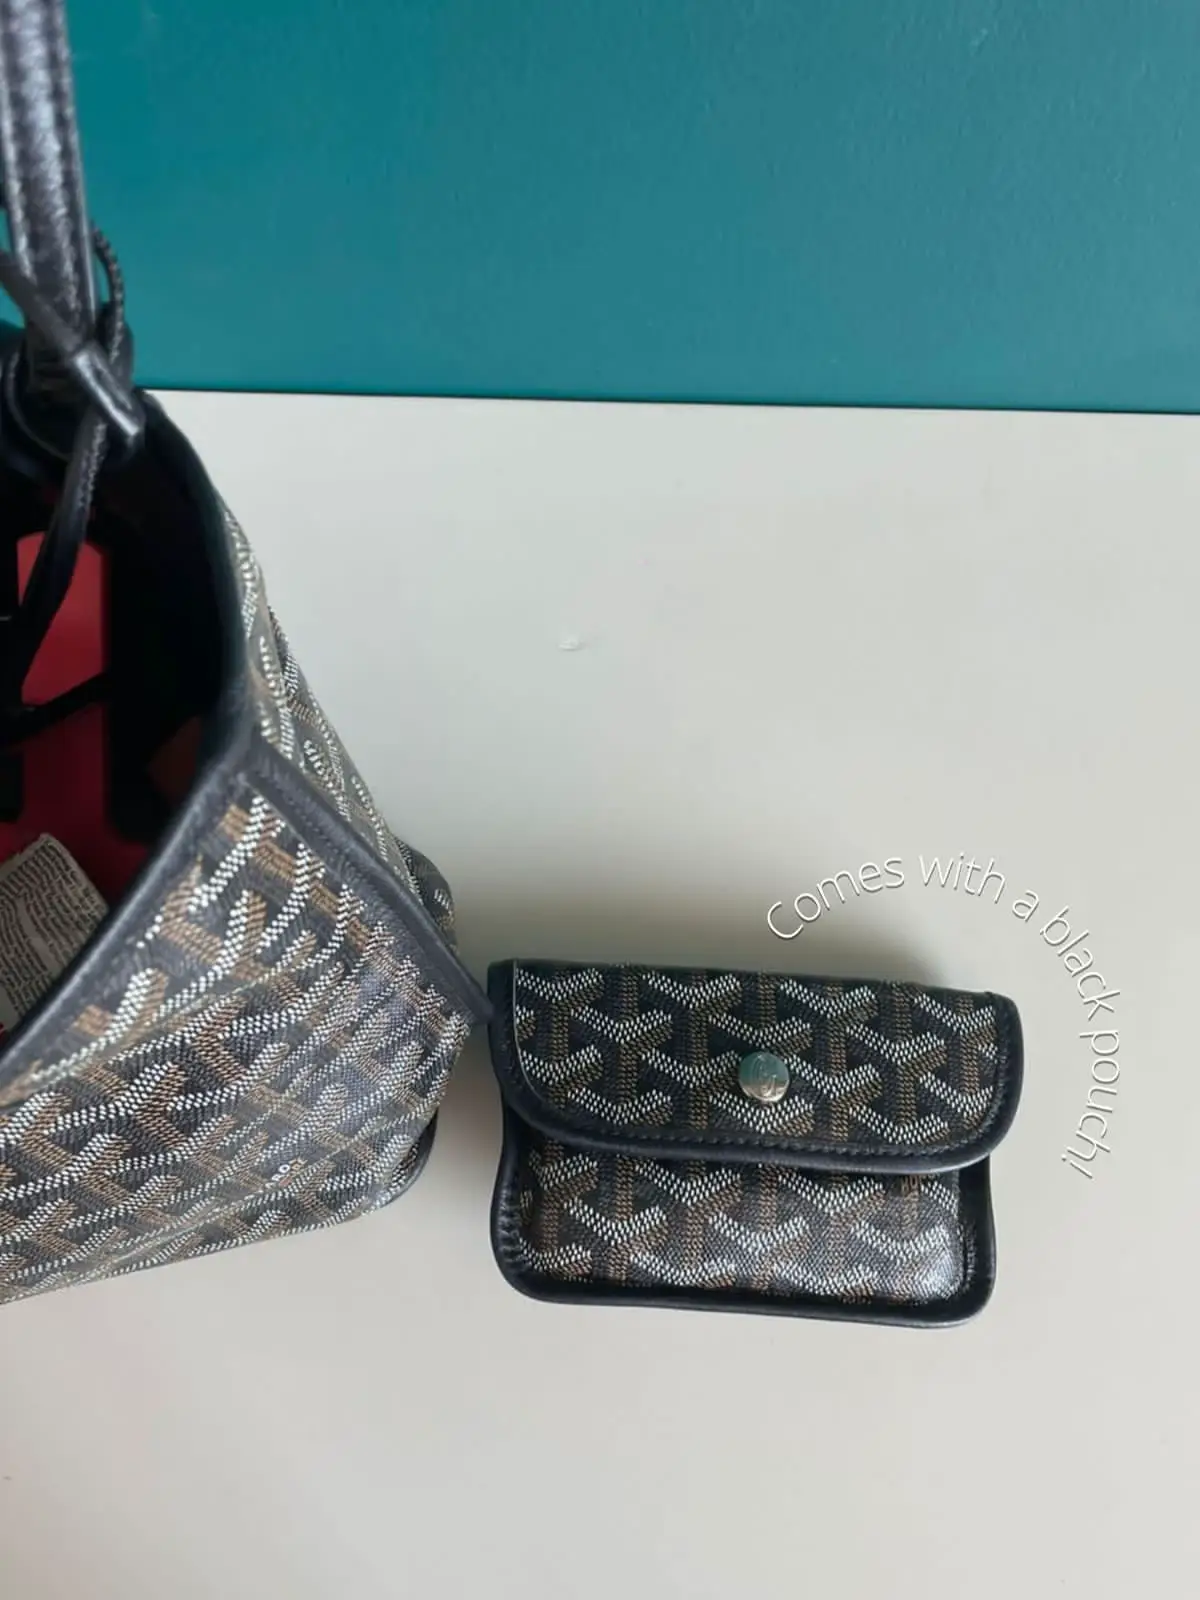 Goyard Anjou PM Unboxing Review - Bought in Singapore Trip 